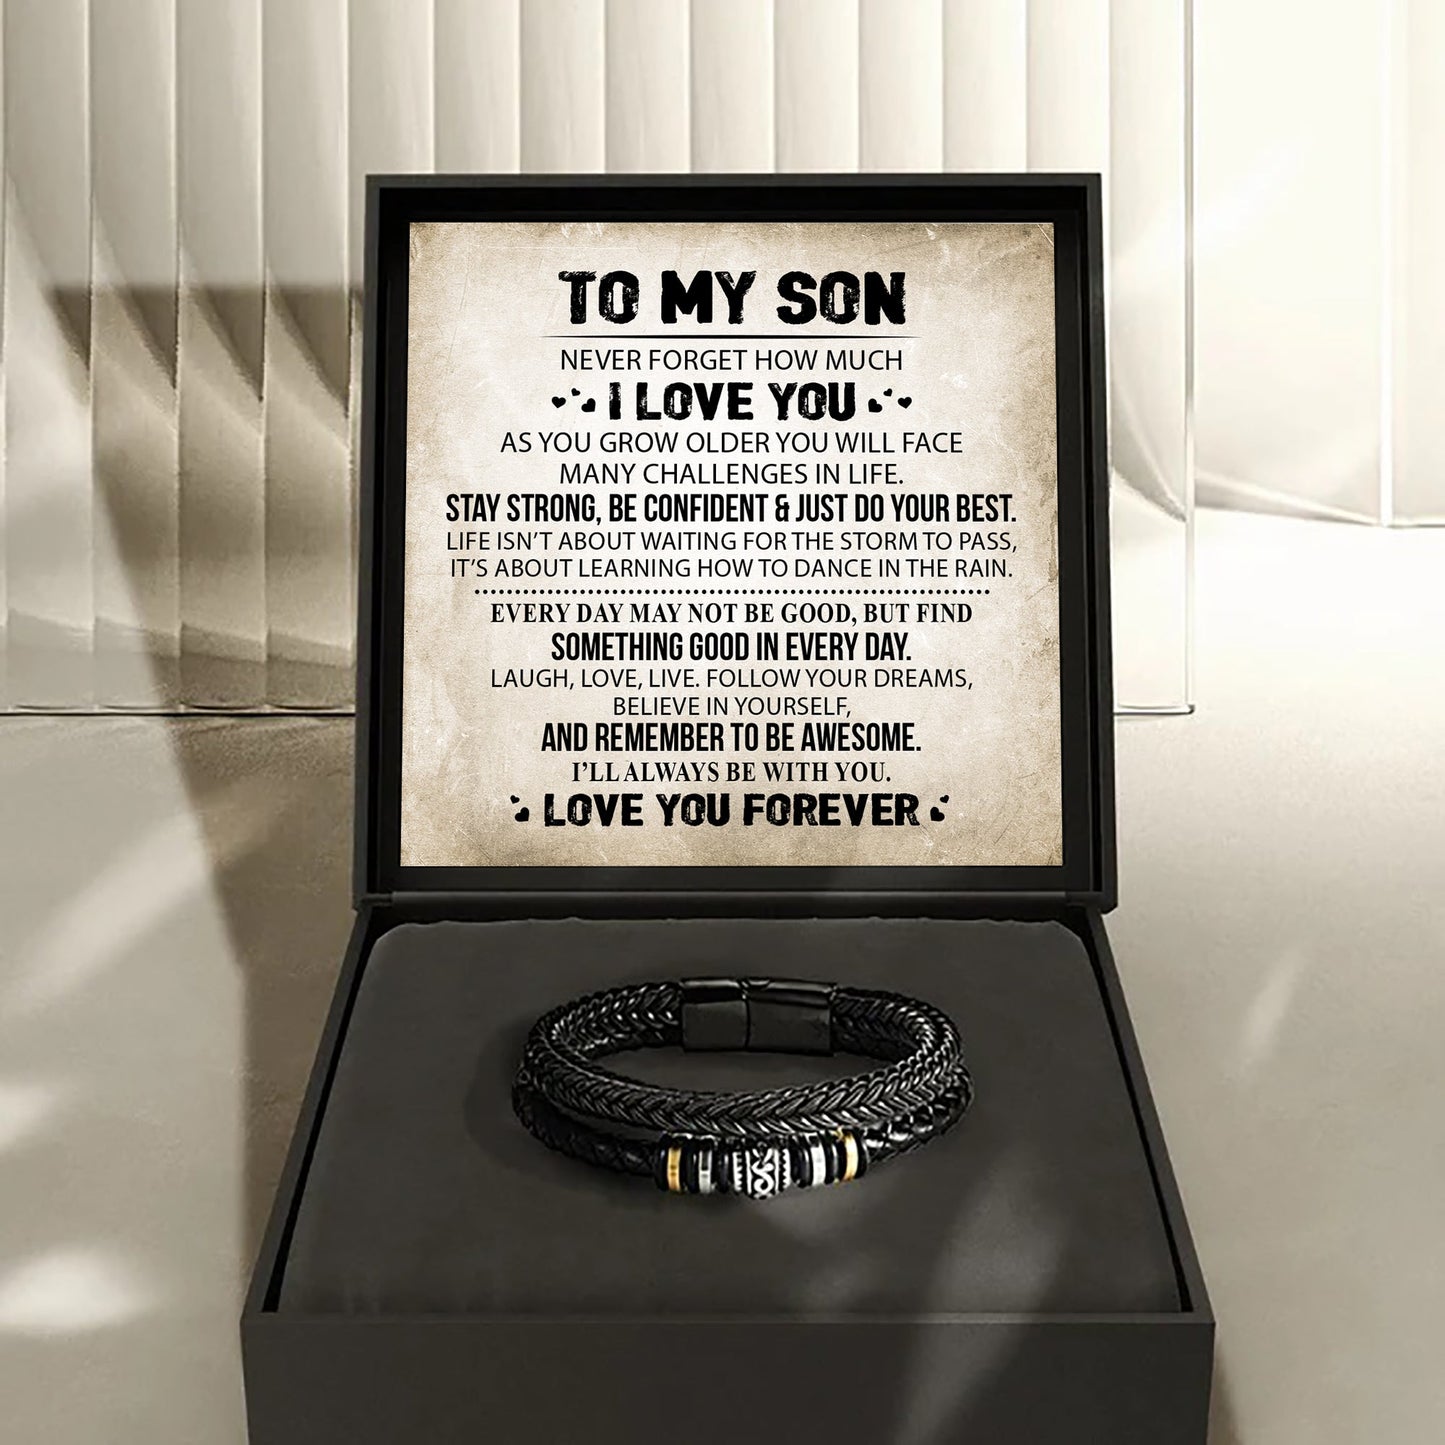 To My Son - "Love You Forever" Bracelet